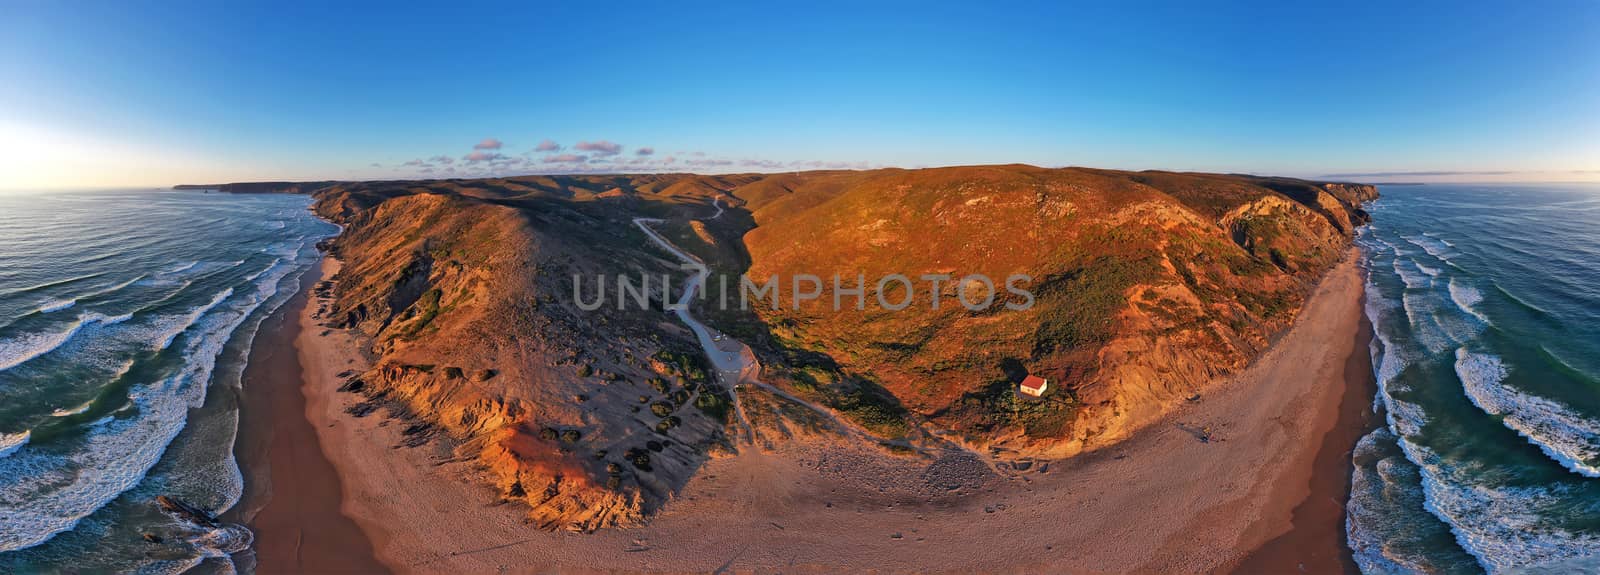 Aerial panorama from the beach at Praia Vale Figueiras in Portug by devy